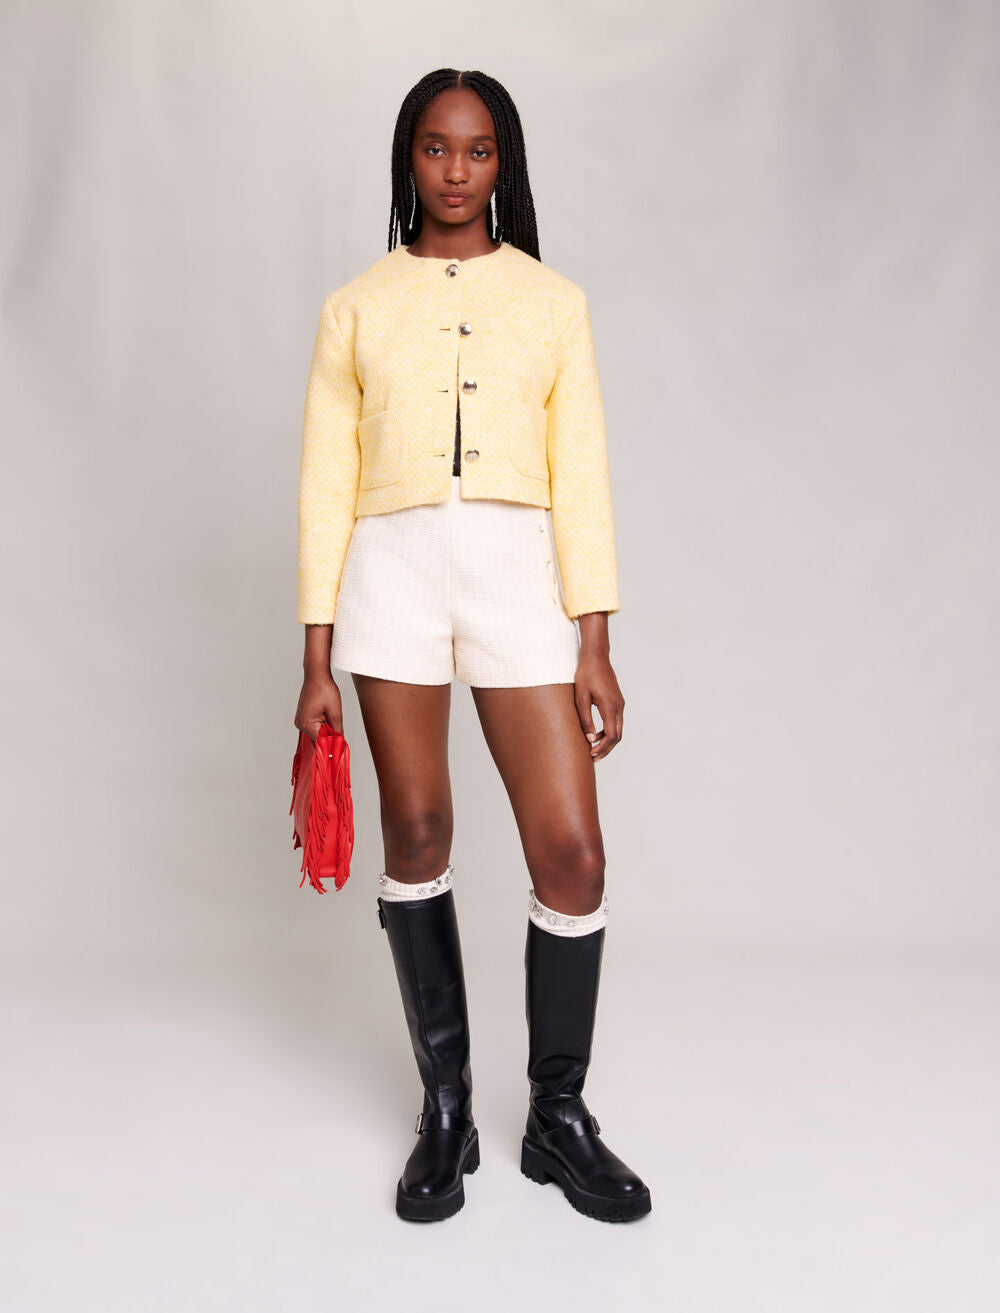 Pale Yellow featured Short jacket in tweed